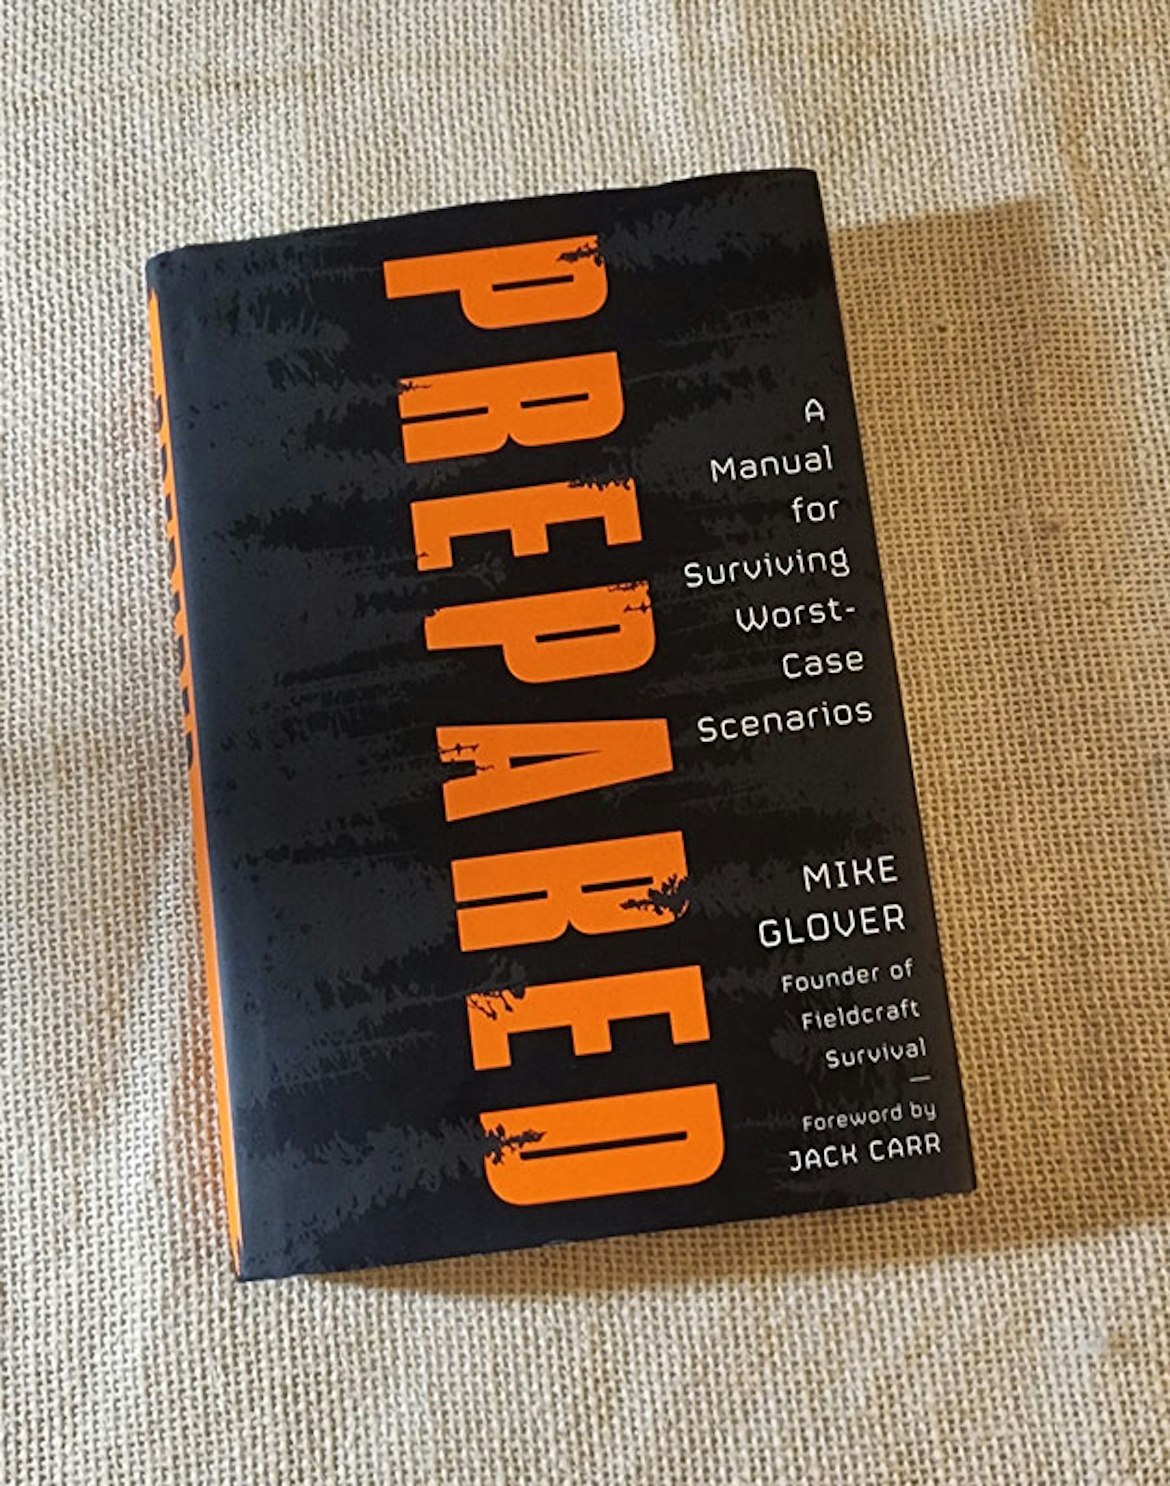 “Prepared: A Manual for Surviving Worst-Case Scenarios” by Mike Glover